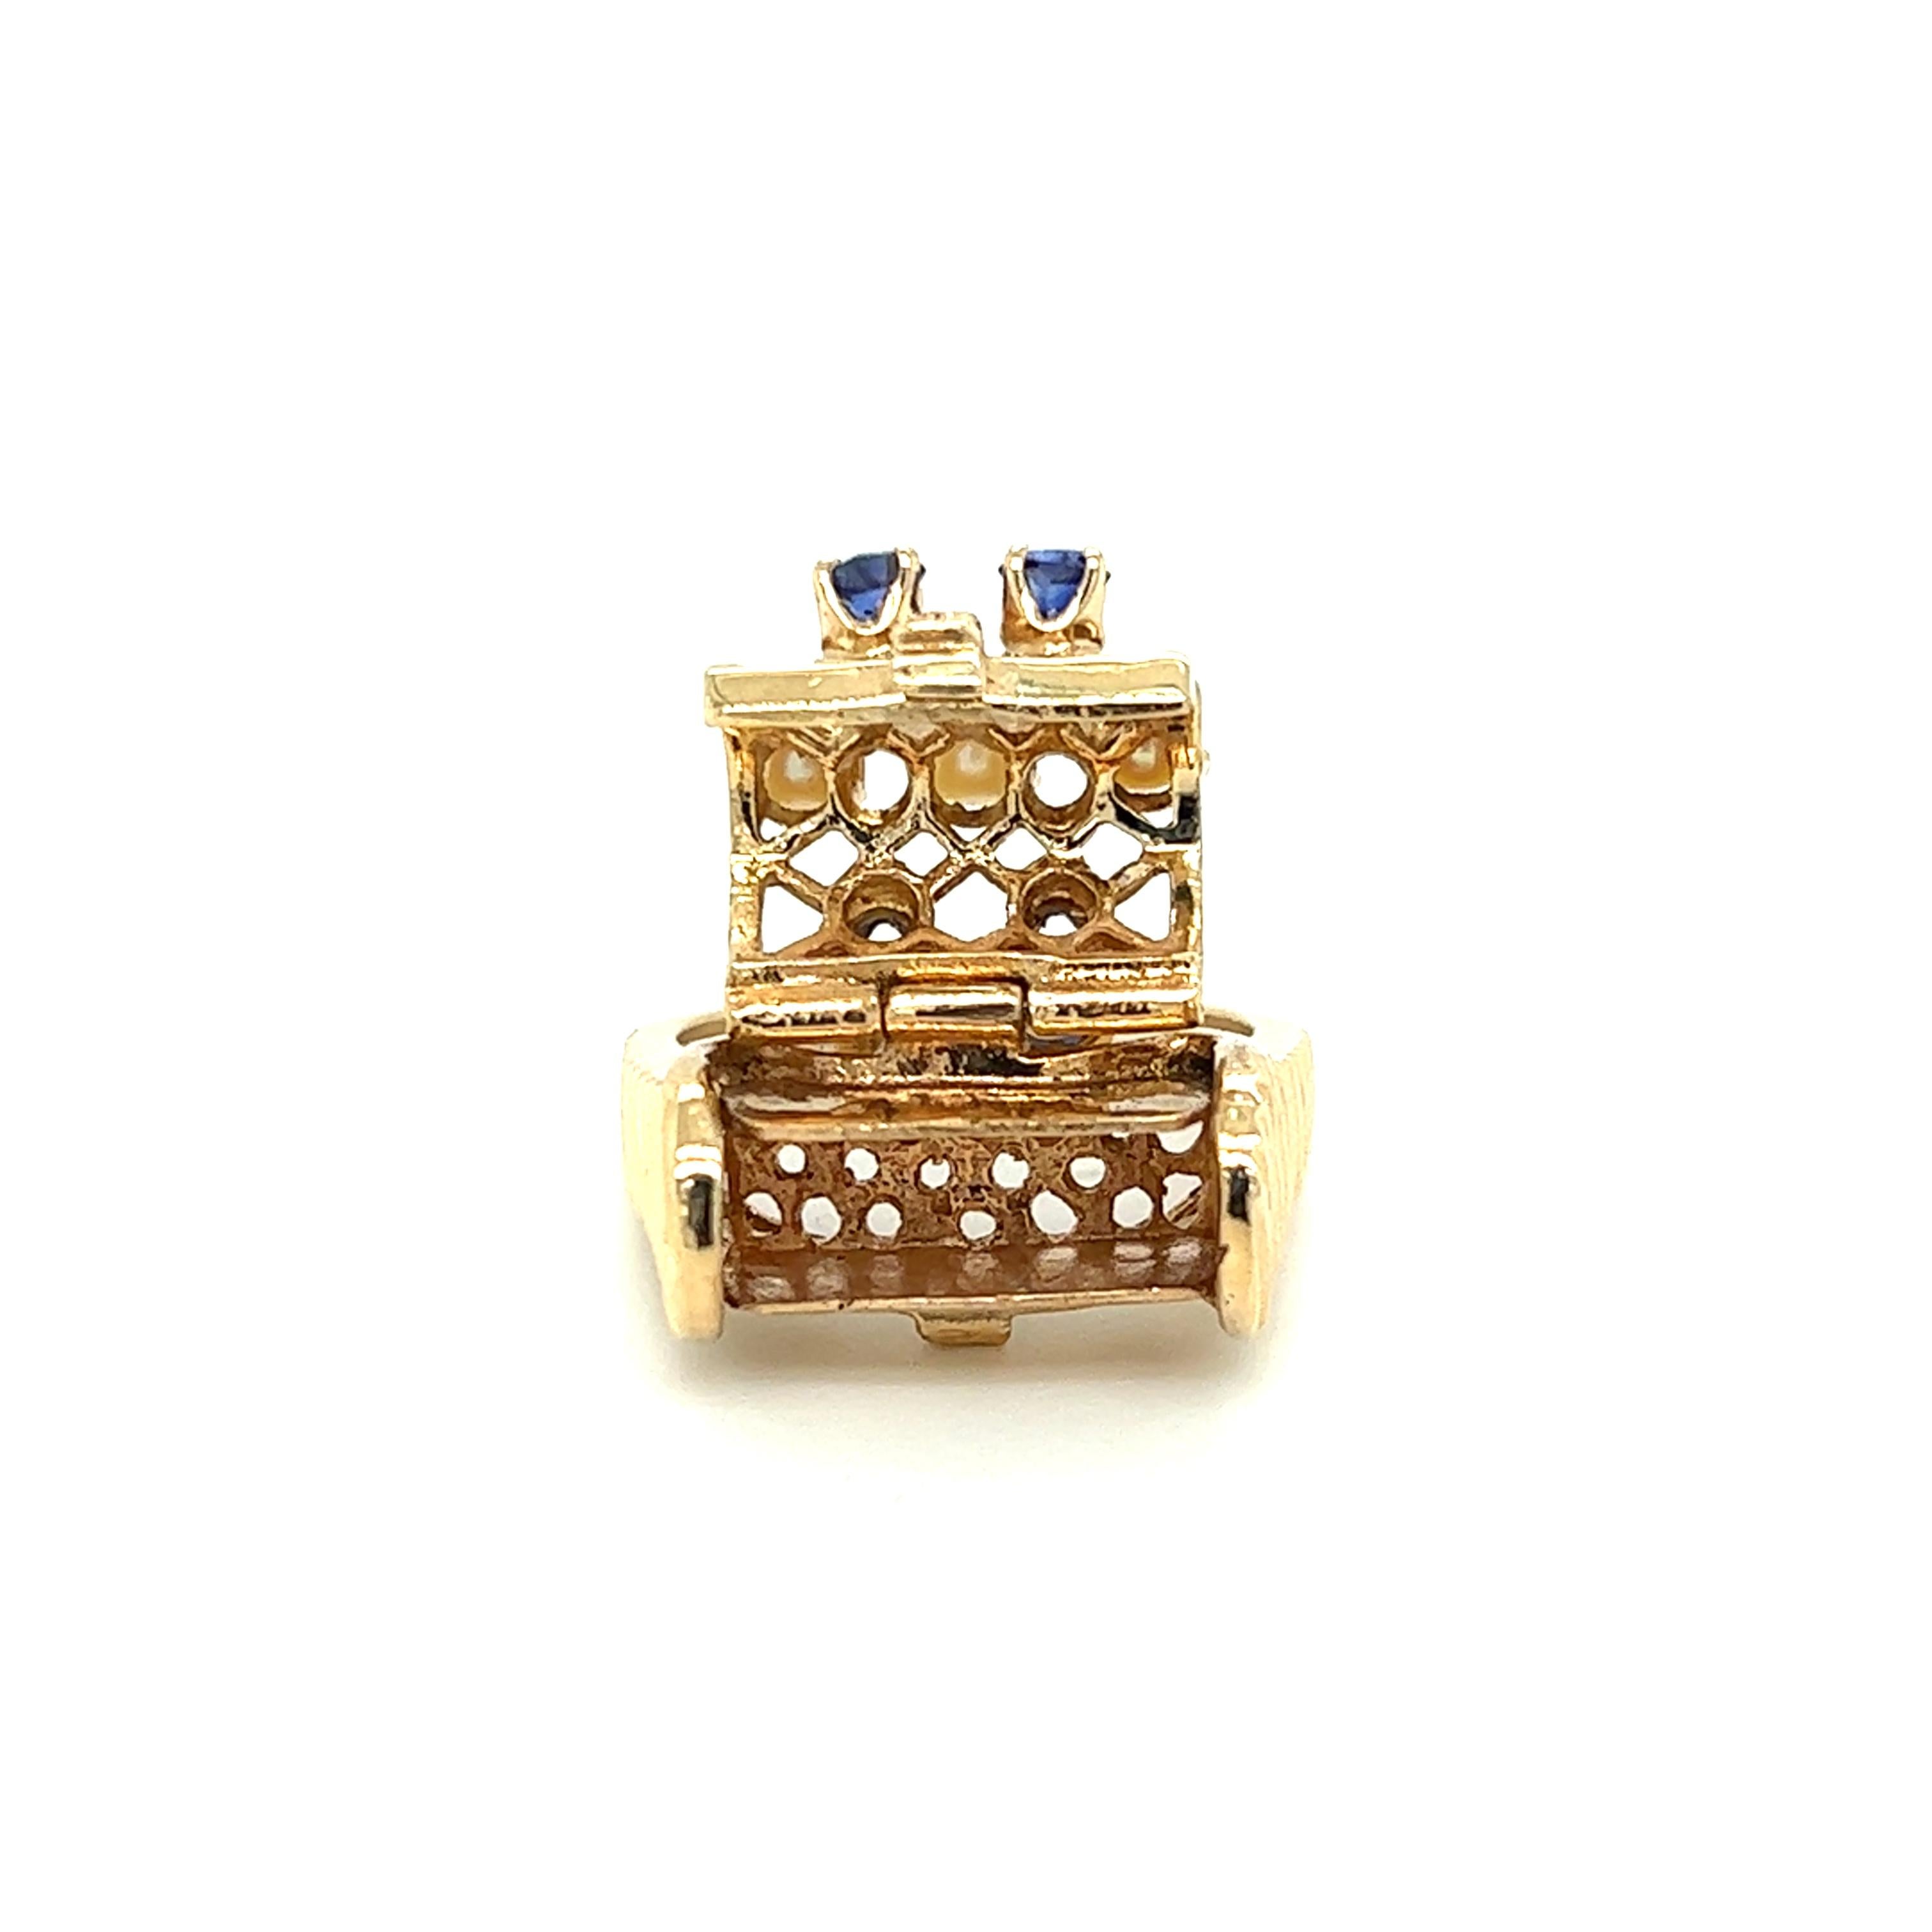 One 14 karat yellow gold poison/pill box ring adorned with four (4) 3mm blue sapphires and three (3) 4mm round cultured pearls. The secret box opens well and will stay closed.  The ring is a finger size 6 and can be resized. Sizing is not included. 